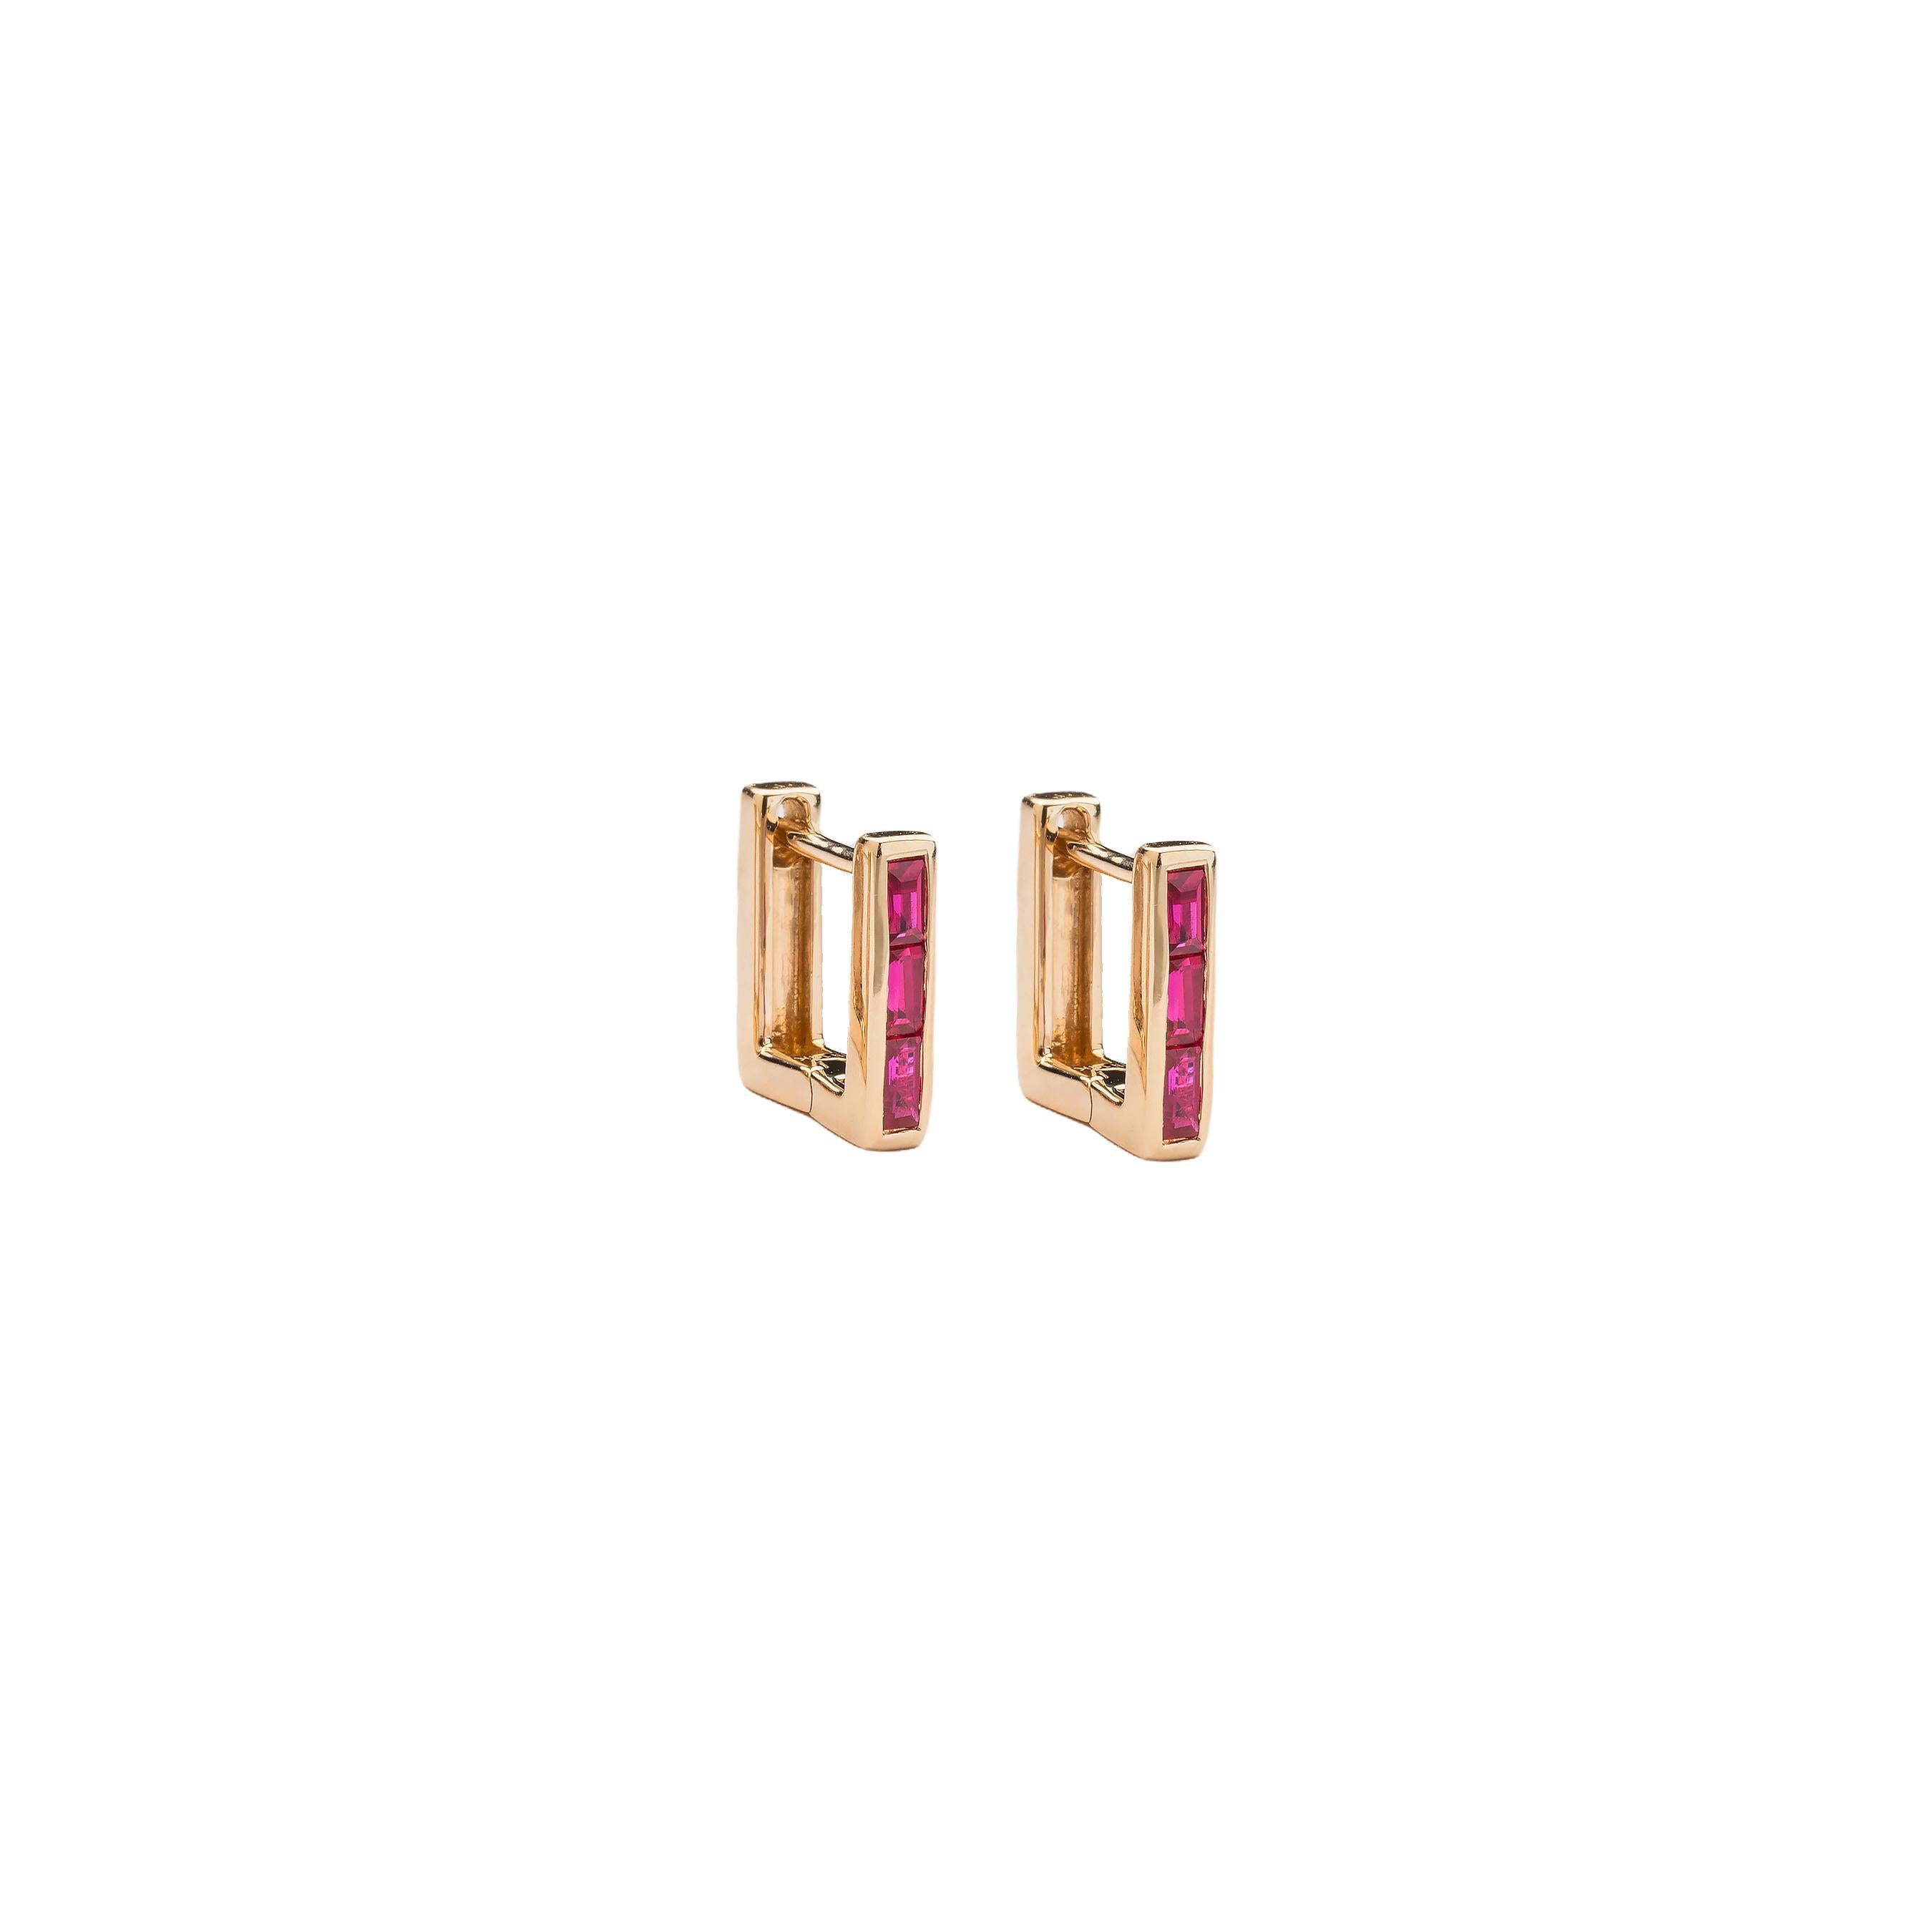 Add a bit of luxury to your classic huggie with a new square format. These Square Huggie Earrings come in various colors, set in solid 14k yellow gold. Can’t find a color you like? Please reach out for addition variations made just for